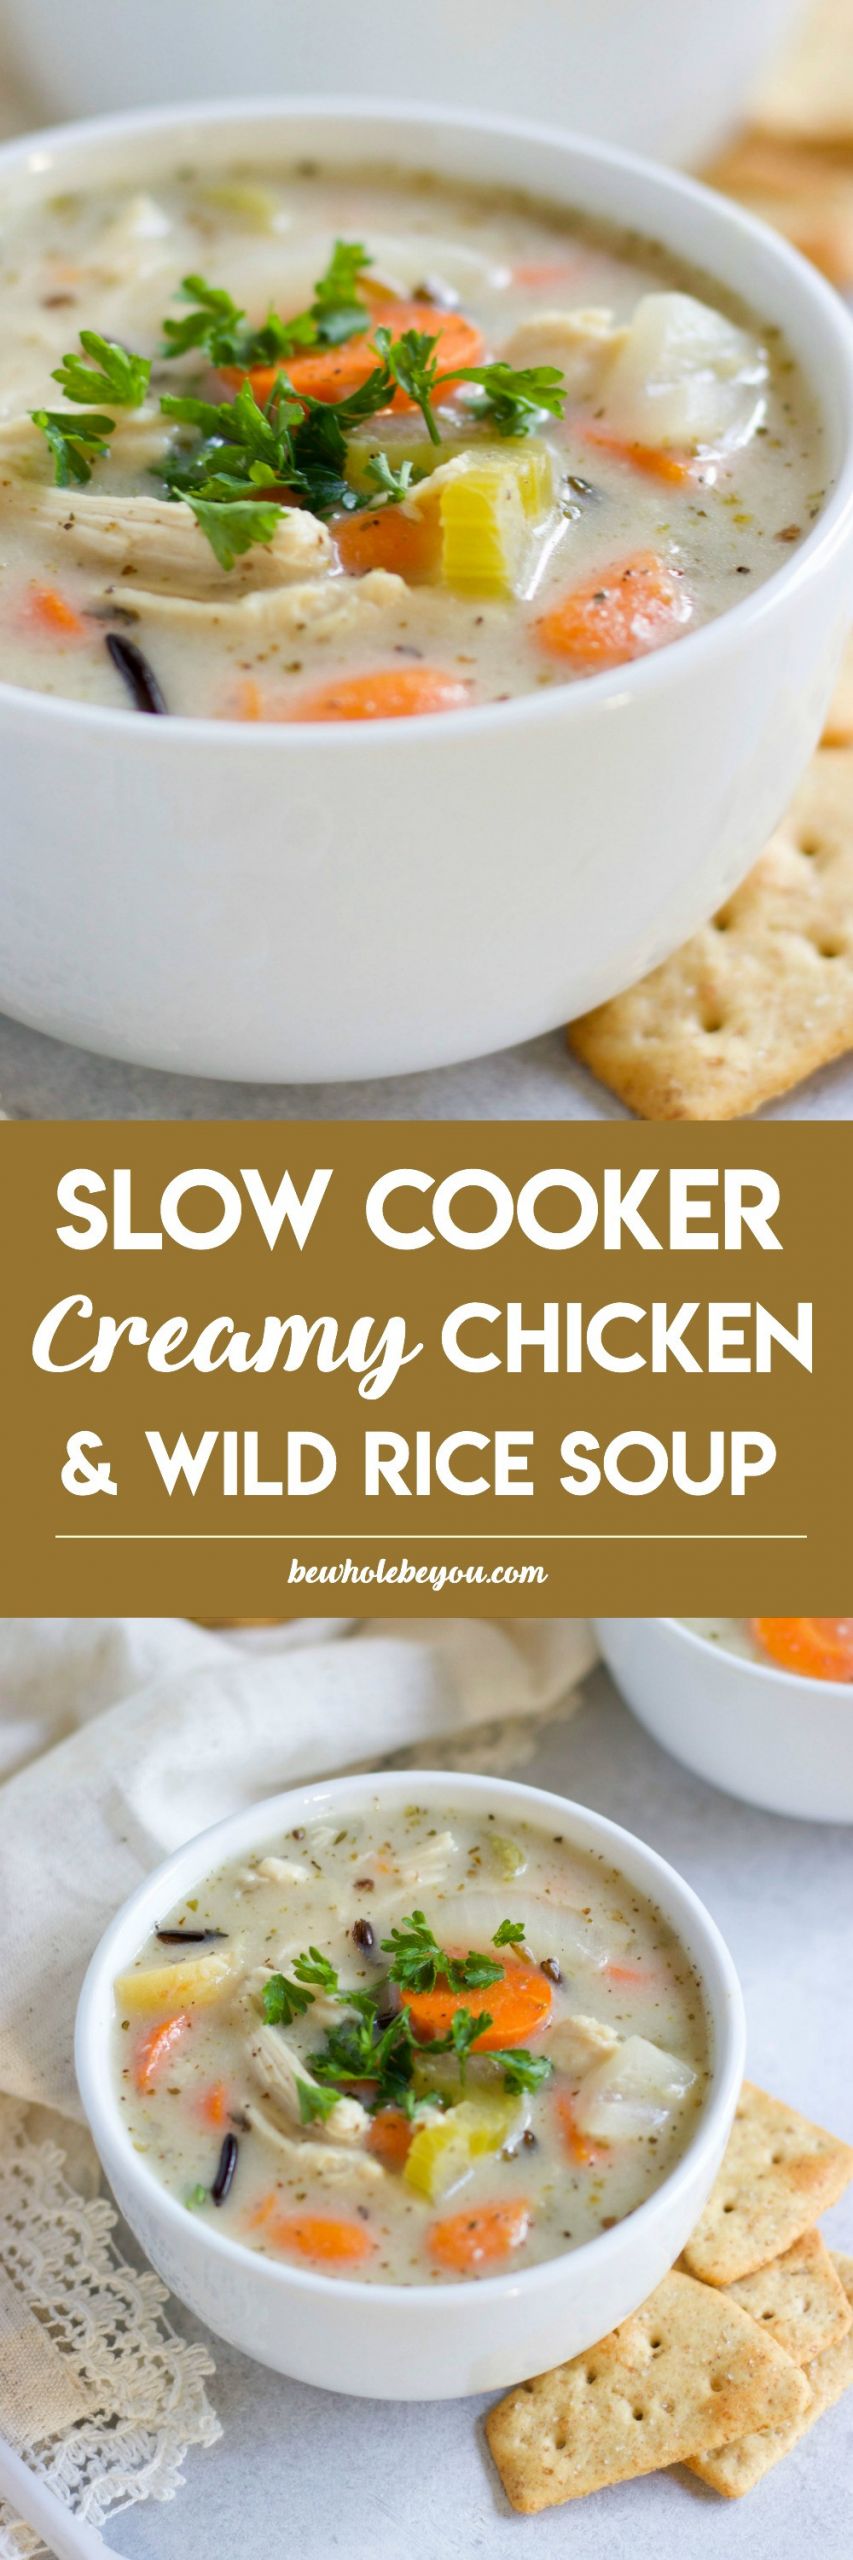 Creamy Chicken Wild Rice Soup Slow Cooker
 Slow Cooker Creamy Chicken and Wild Rice Soup Be Whole